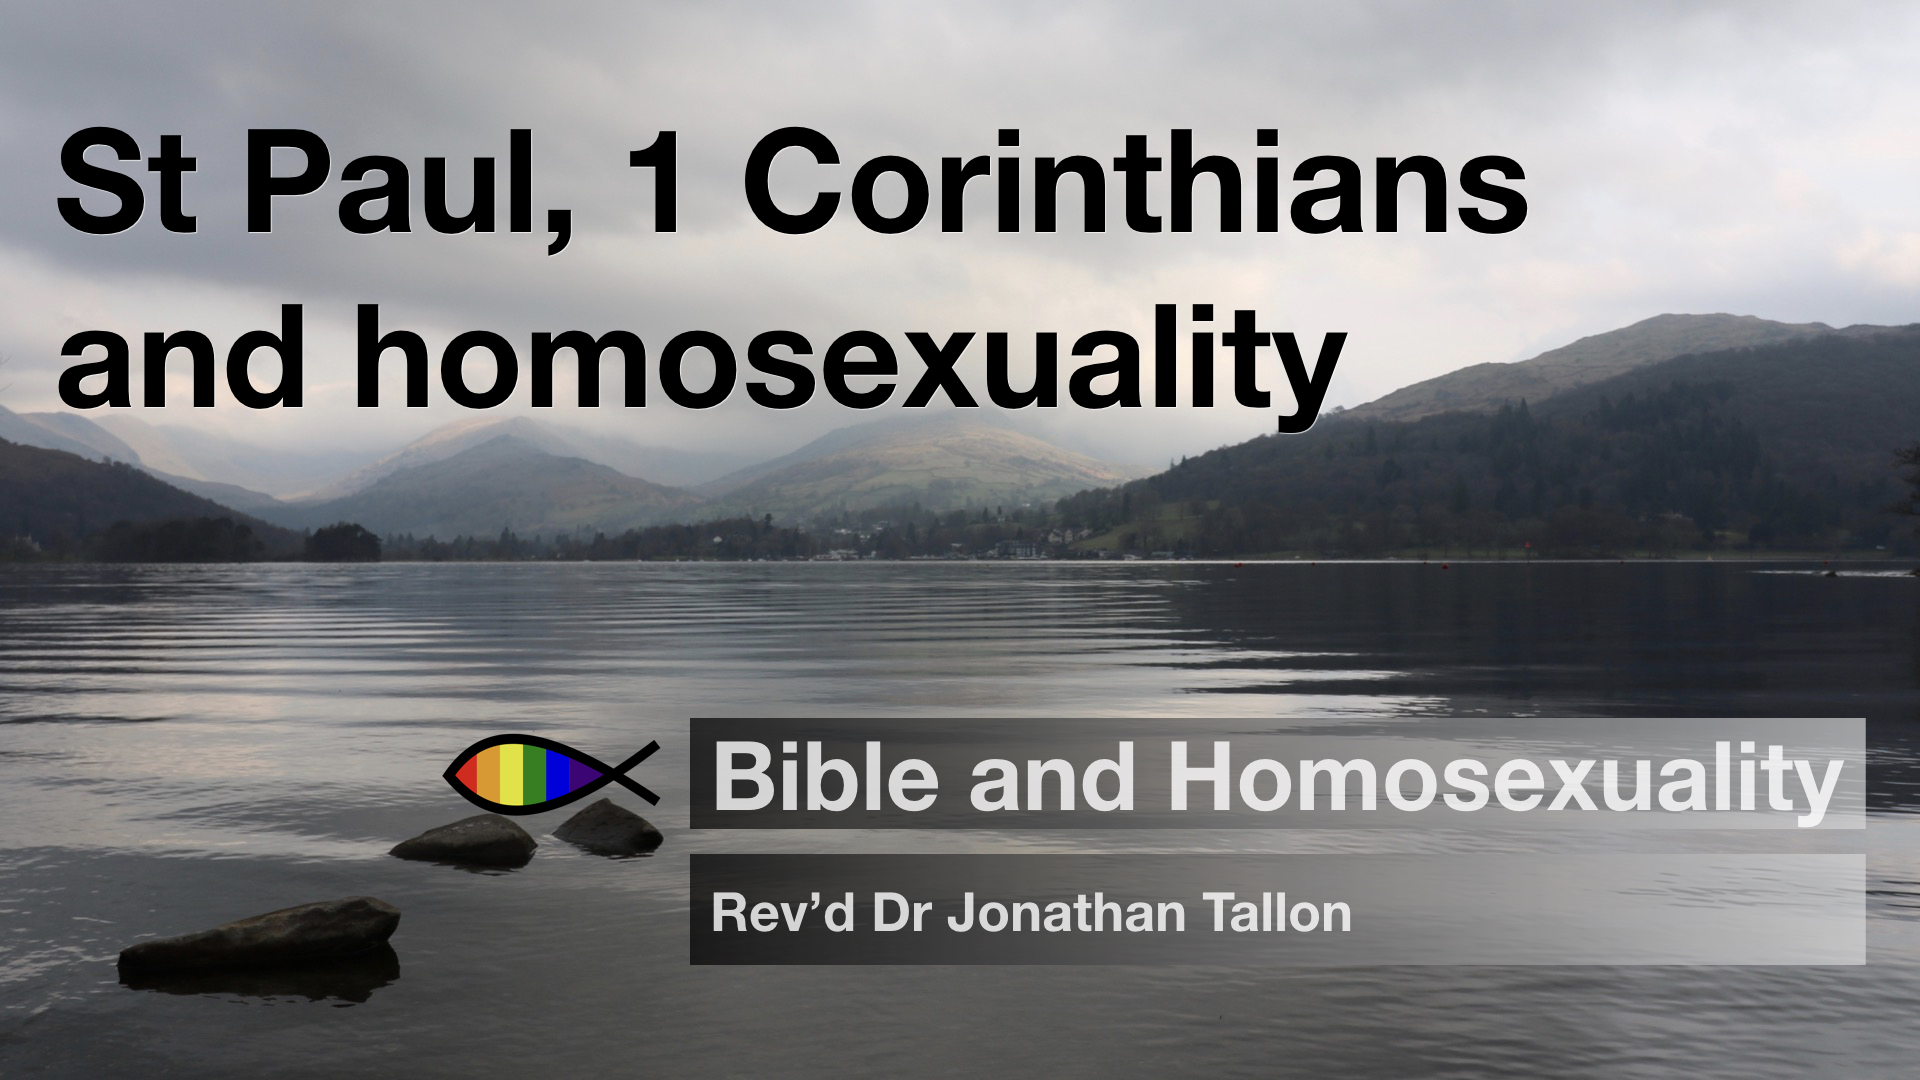 St Paul, 1 Corinthians and homosexuality